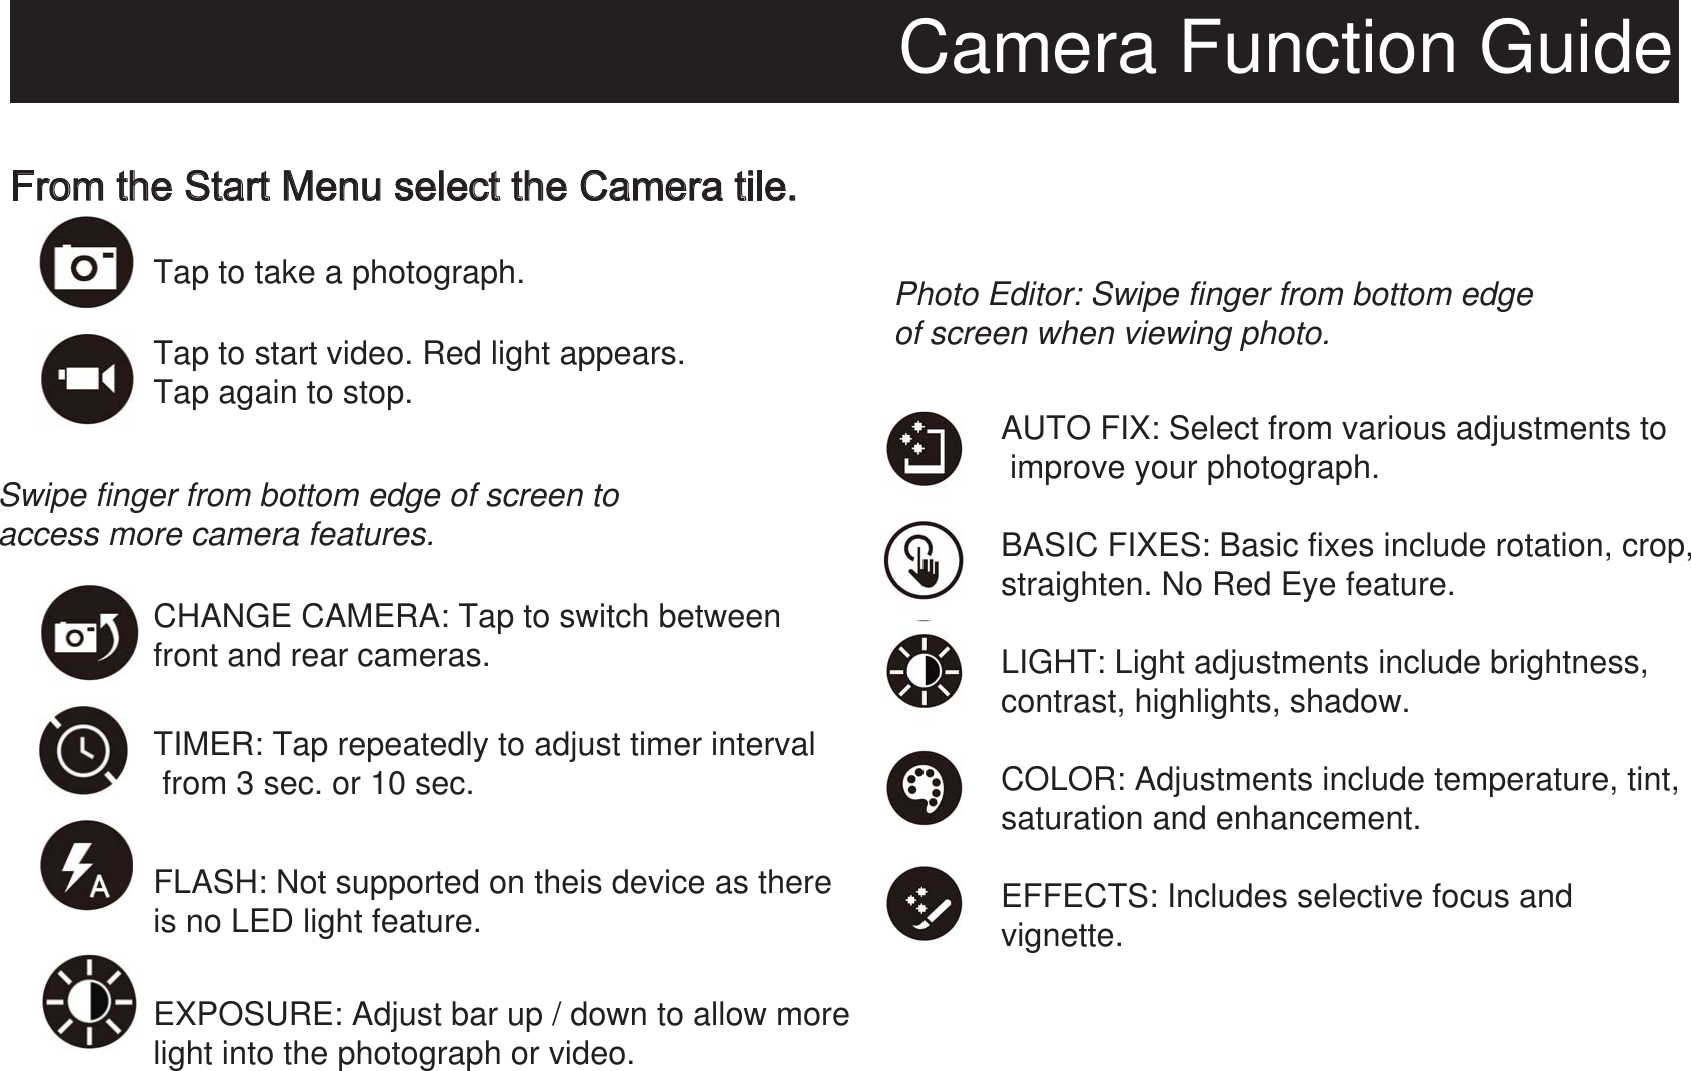 Camera Function GuideFrom the Start Menu select the Camera tile.  Tap to take a photograph.Tap to start video. Red light appears.Tap again to stop.Swipe finger from bottom edge of screen to access more camera features.Photo Editor: Swipe finger from bottom edge of screen when viewing photo. CHANGE CAMERA: Tap to switch between front and rear cameras.AUTO FIX: Select from various adjustments to improve your photograph.BASIC FIXES: Basic fixes include rotation, crop, straighten. No Red Eye feature.LIGHT: Light adjustments include brightness, contrast, highlights, shadow.COLOR: Adjustments include temperature, tint, saturation and enhancement.EFFECTS: Includes selective focus and vignette.TIMER: Tap repeatedly to adjust timer interval from 3 sec. or 10 sec.FLASH: Not supported on theis device as there is no LED light feature.EXPOSURE: Adjust bar up / down to allow morelight into the photograph or video.